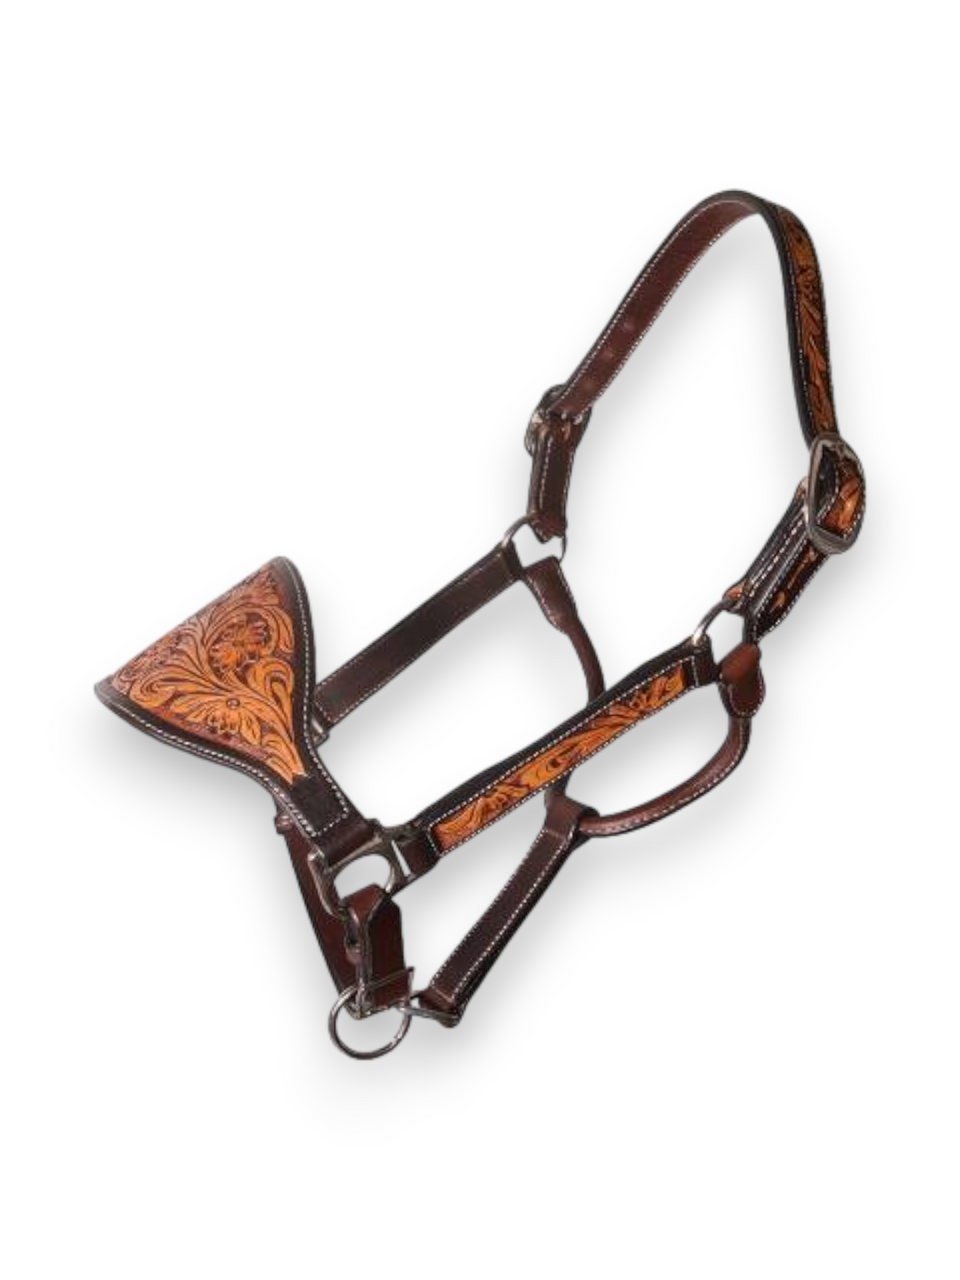 Professional's Choice Tooled Bronc Noseband Leather Halter